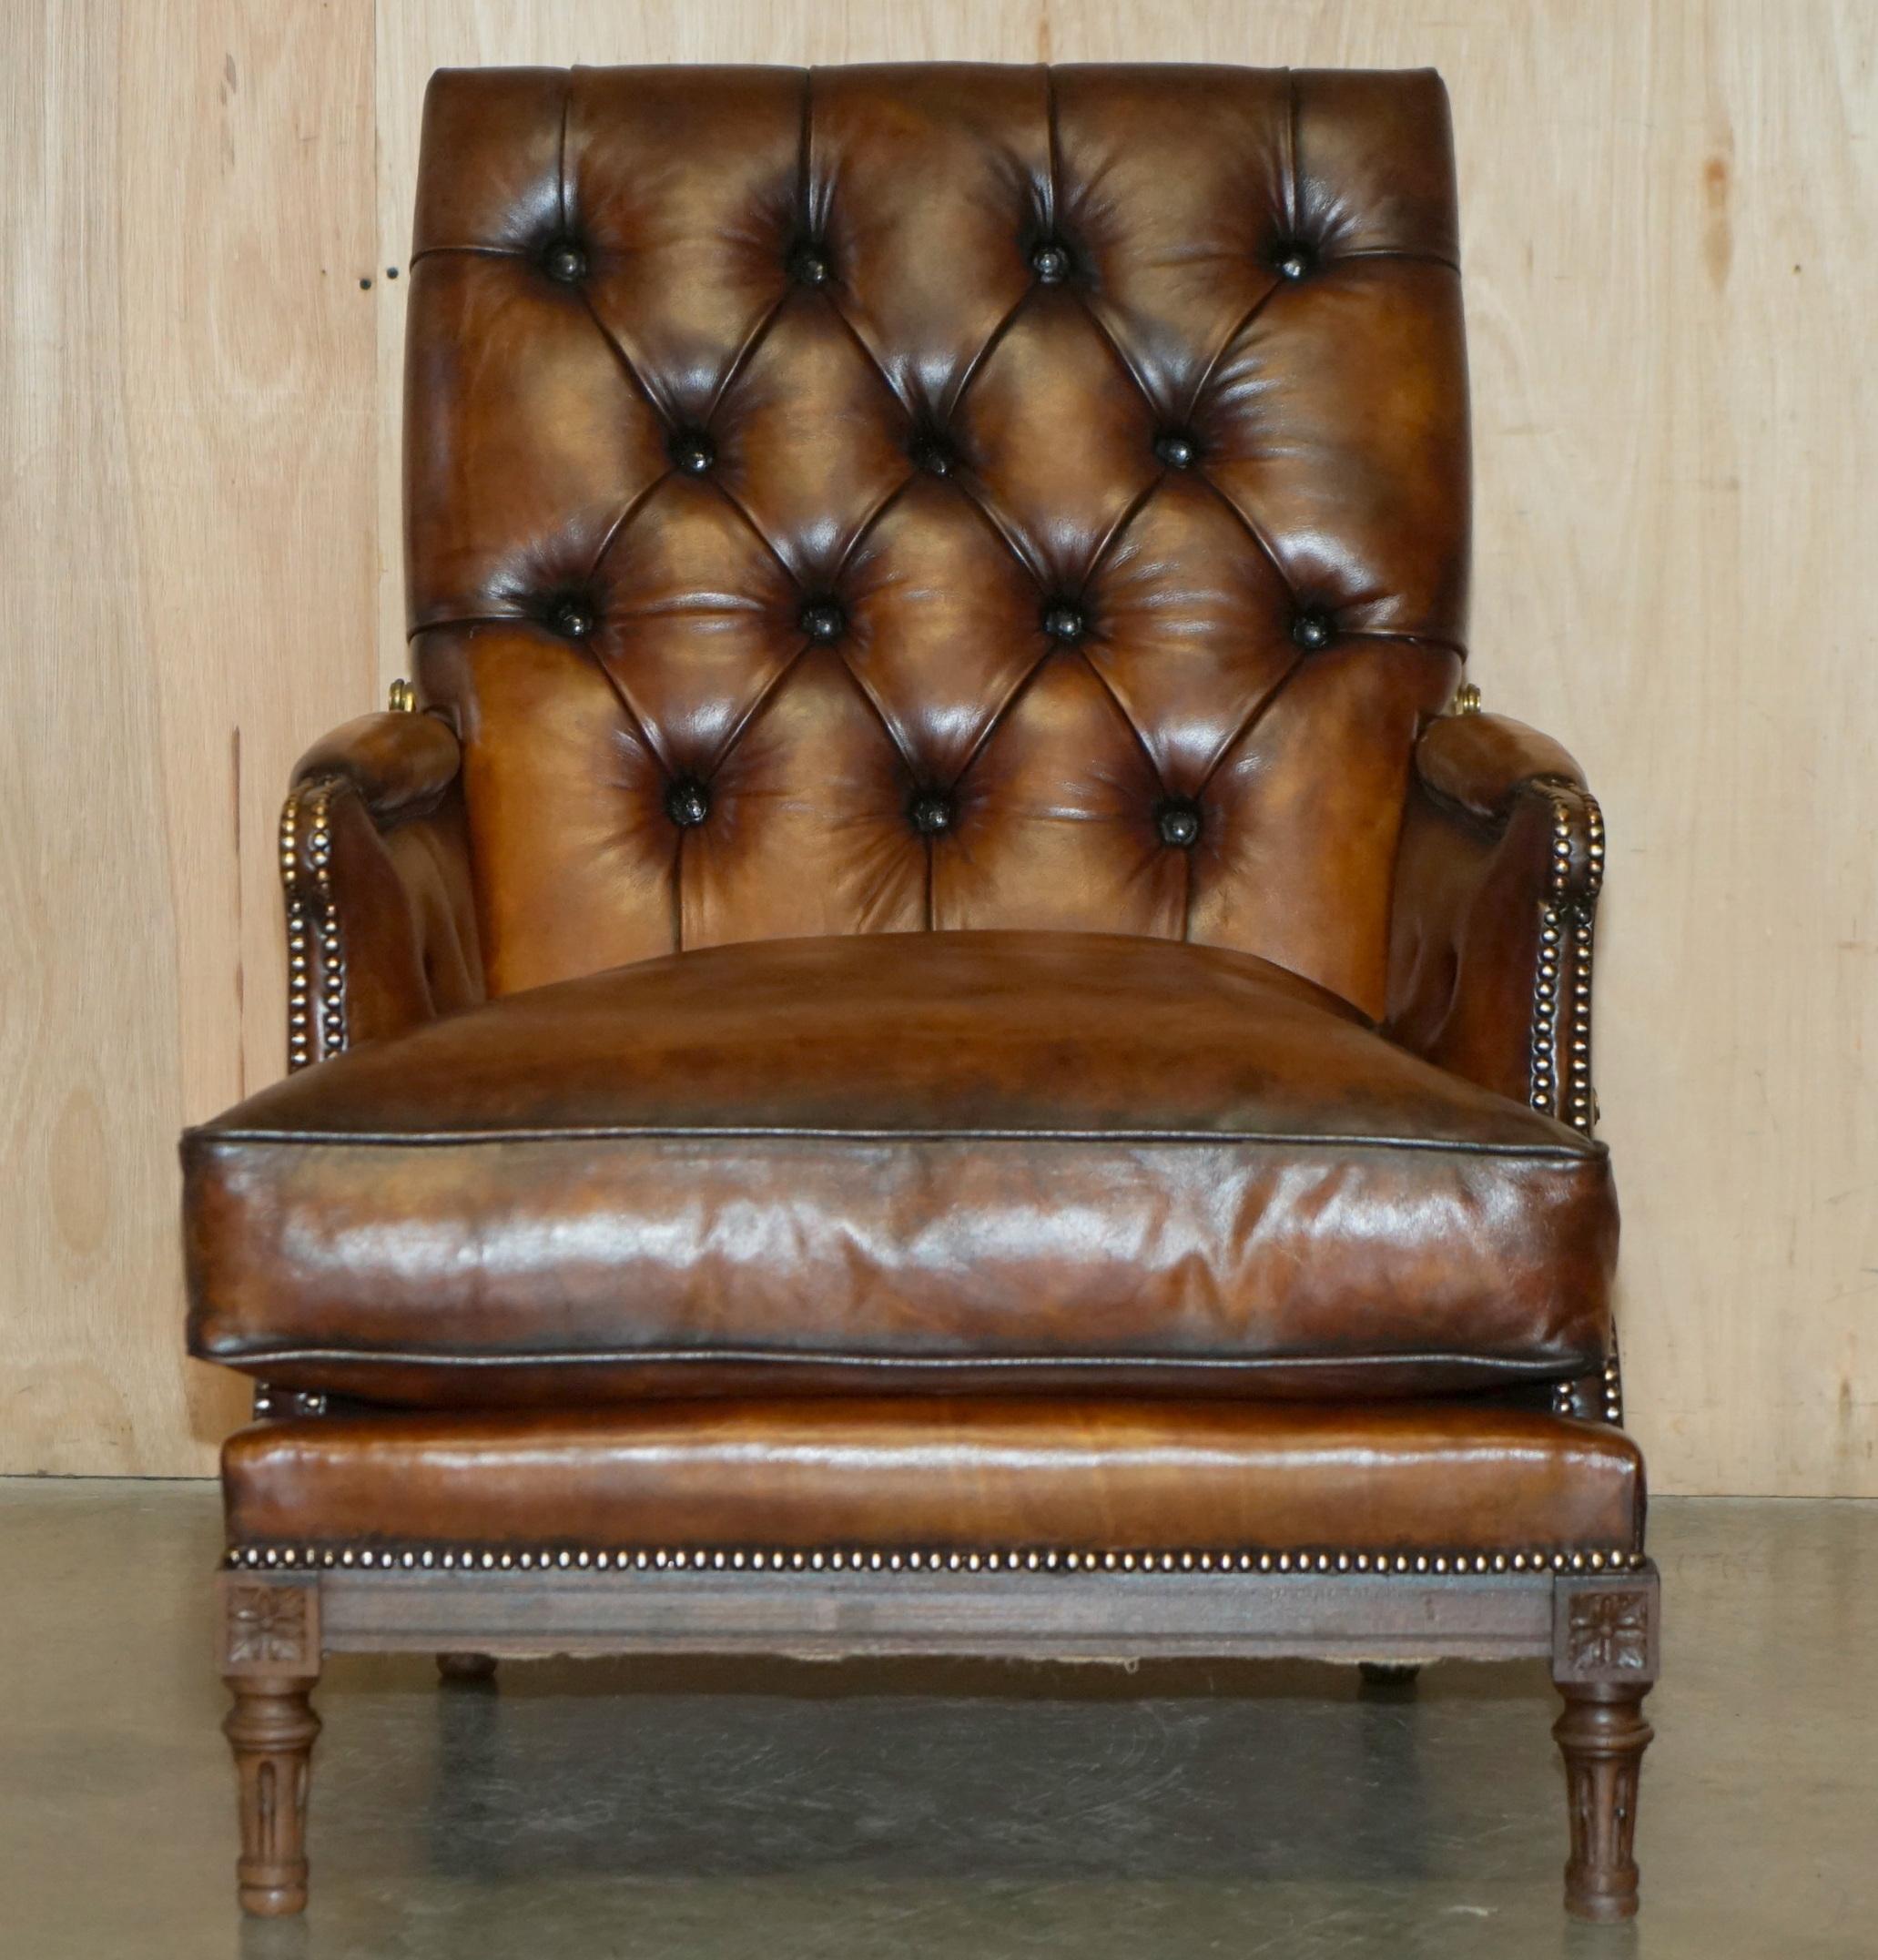 Royal House Antiques

Royal House Antiques is delighted to offer for sale this absolutely stunning, top to bottom restored, hand dyed deep Cigar brown leather reclining armchair

Please note the delivery fee listed is just a guide, it covers within